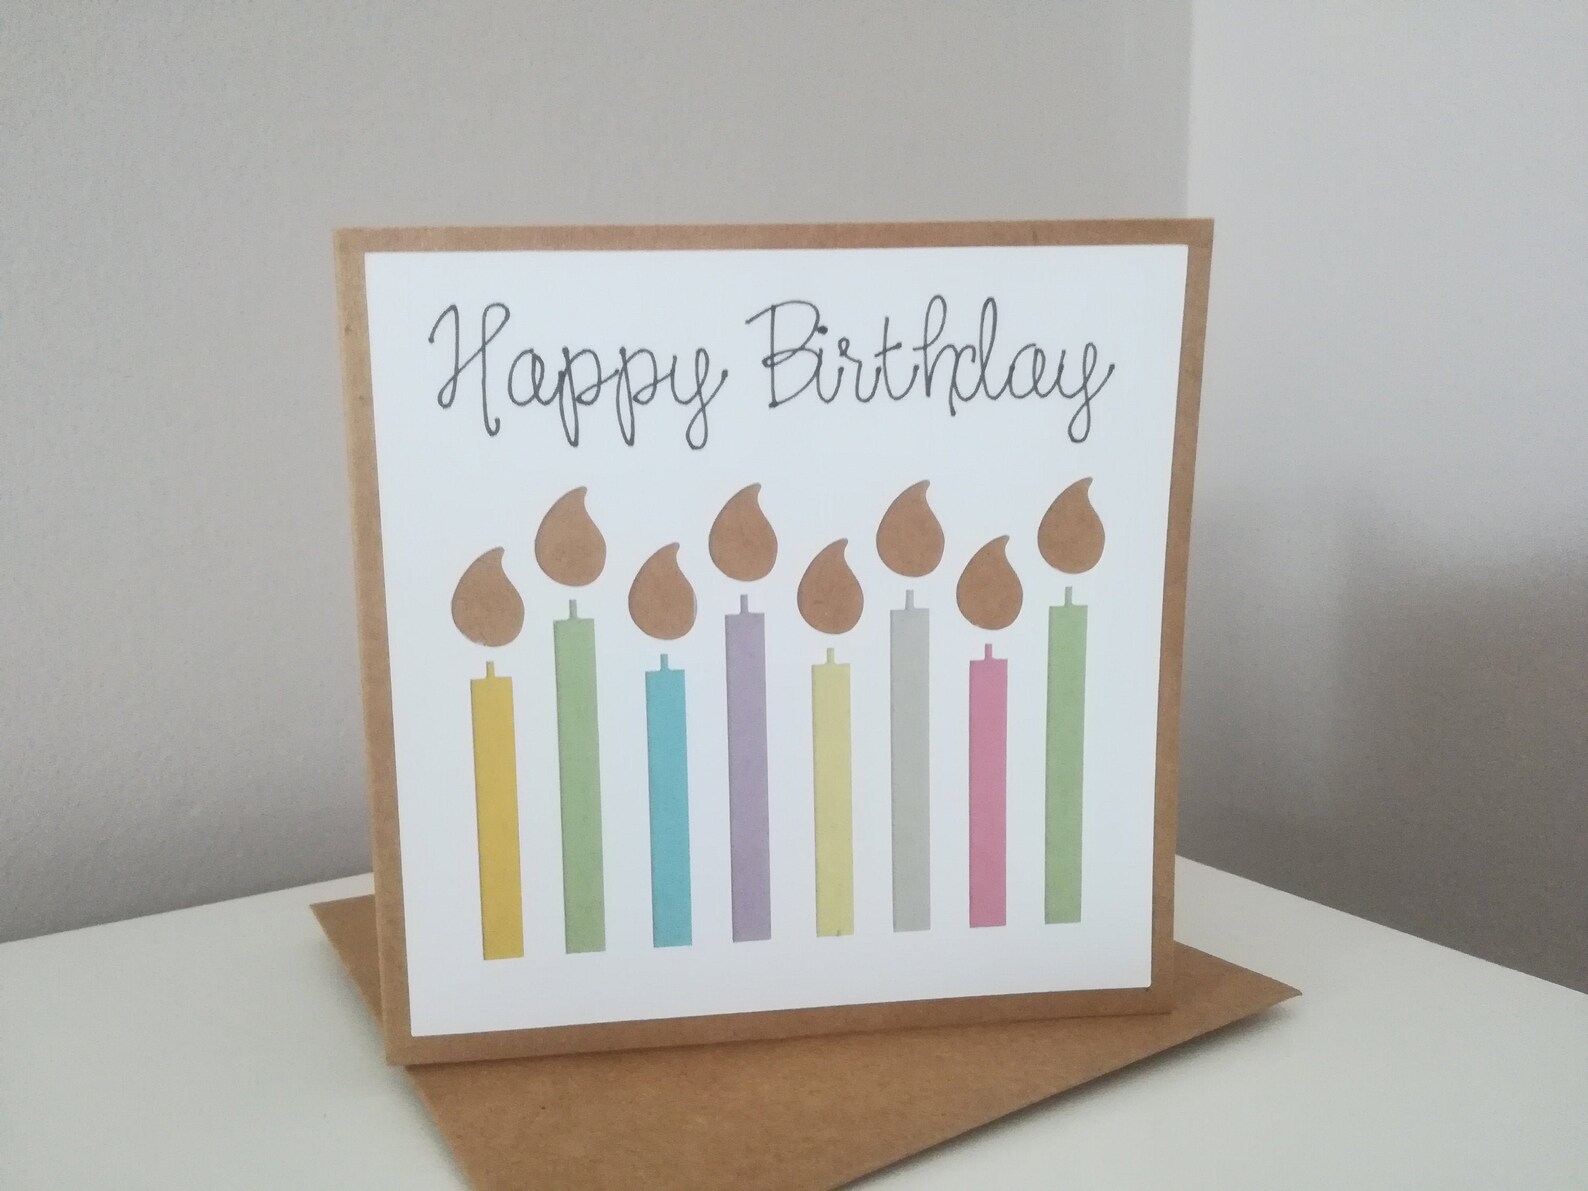 Happy Birthday Candle Greeting Card | Etsy